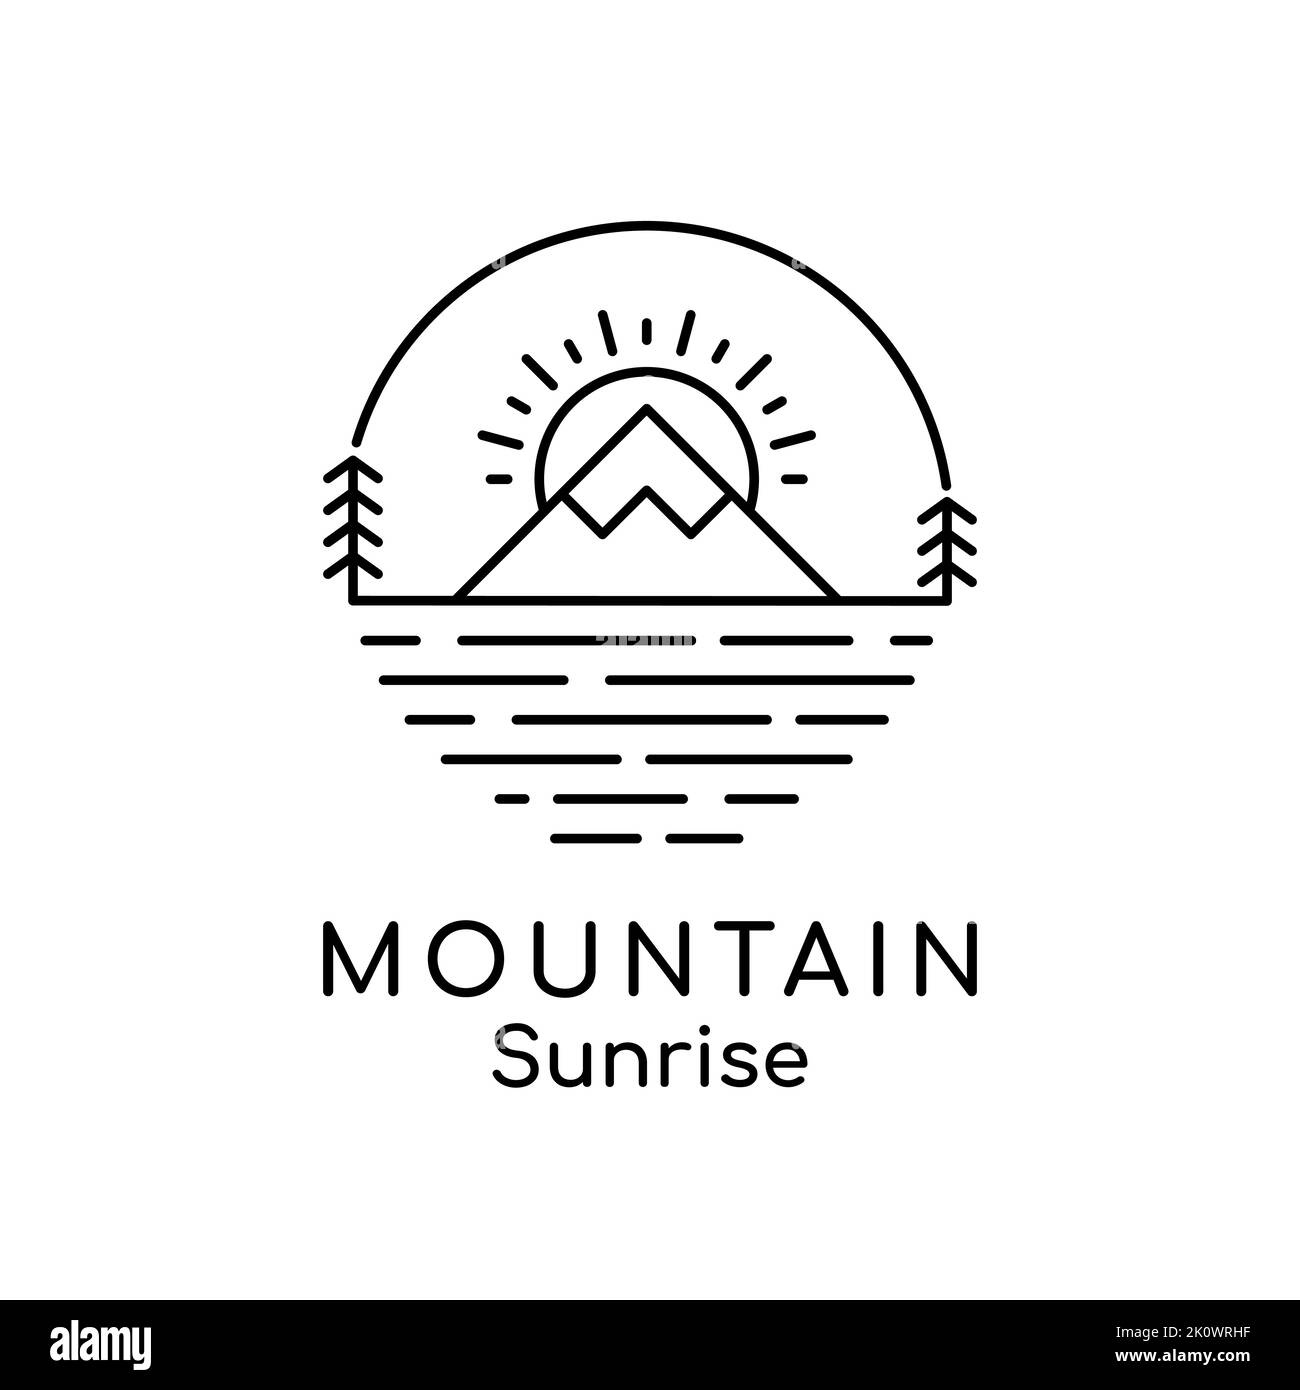 Mountain sunrise line art logo. Linear mountain emblem with a sun, lake and pine trees. Circle shape outdoors symbol. Travel, adventure, nature Vector Stock Vector